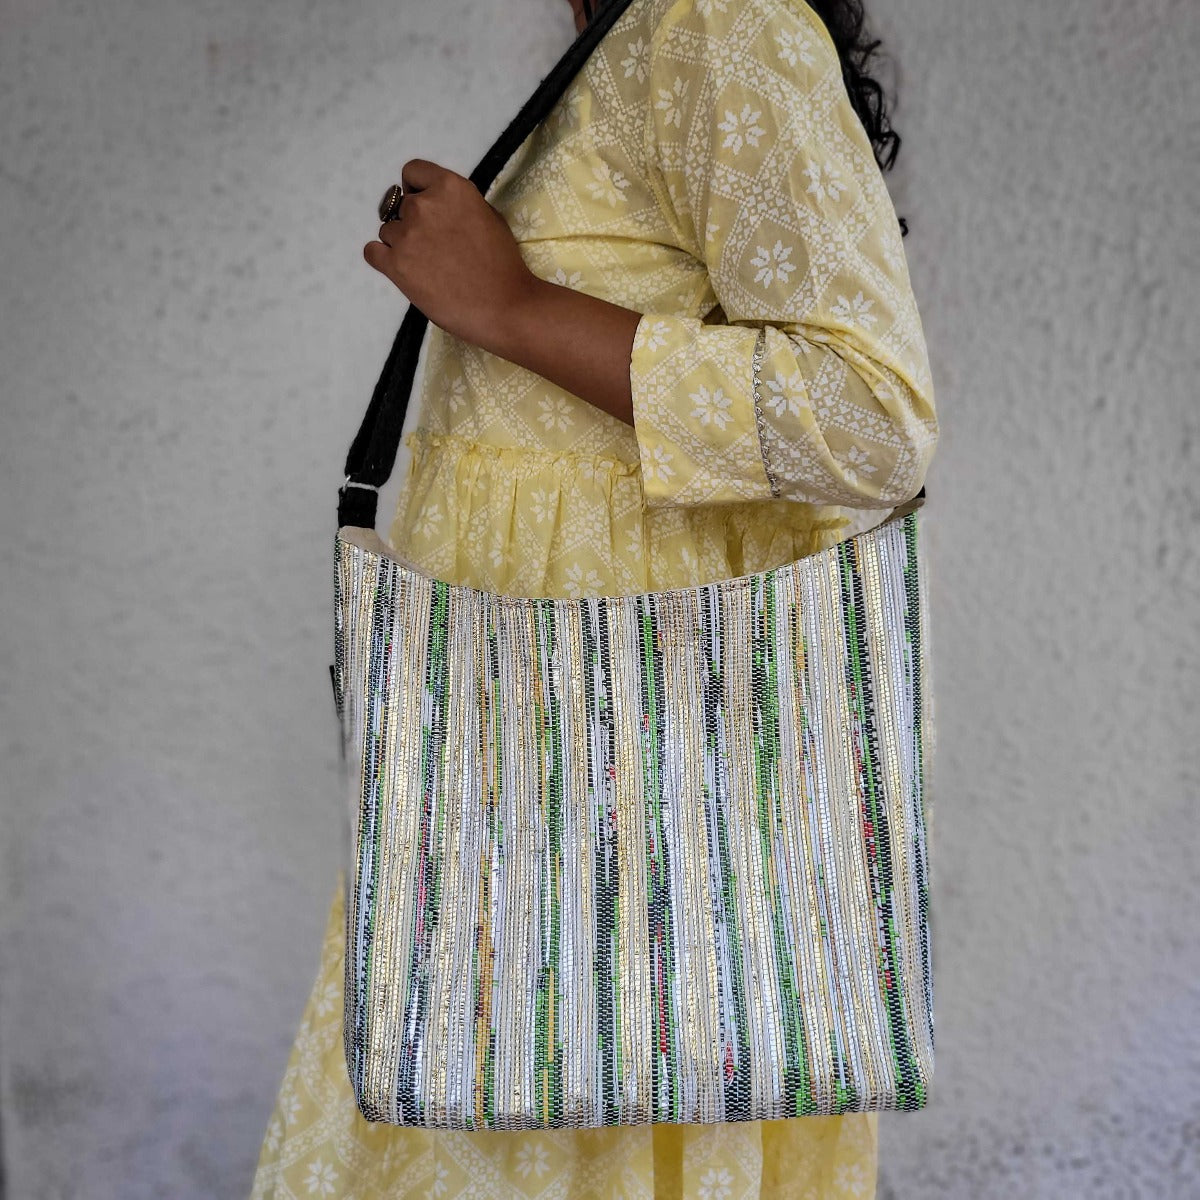 reCharkha Upcycled Handwoven Recycle Livelihoods Handcraft Eclipse Jhola Everyday Bag Shopper Bag Ethically Tribal Made in India Pune Warli Tribe Handloom Refash Trash Fash Waste EcoSocial Upcyclers Conscious Fashion Upcycled slow Trending Swadeshi Weave Textile